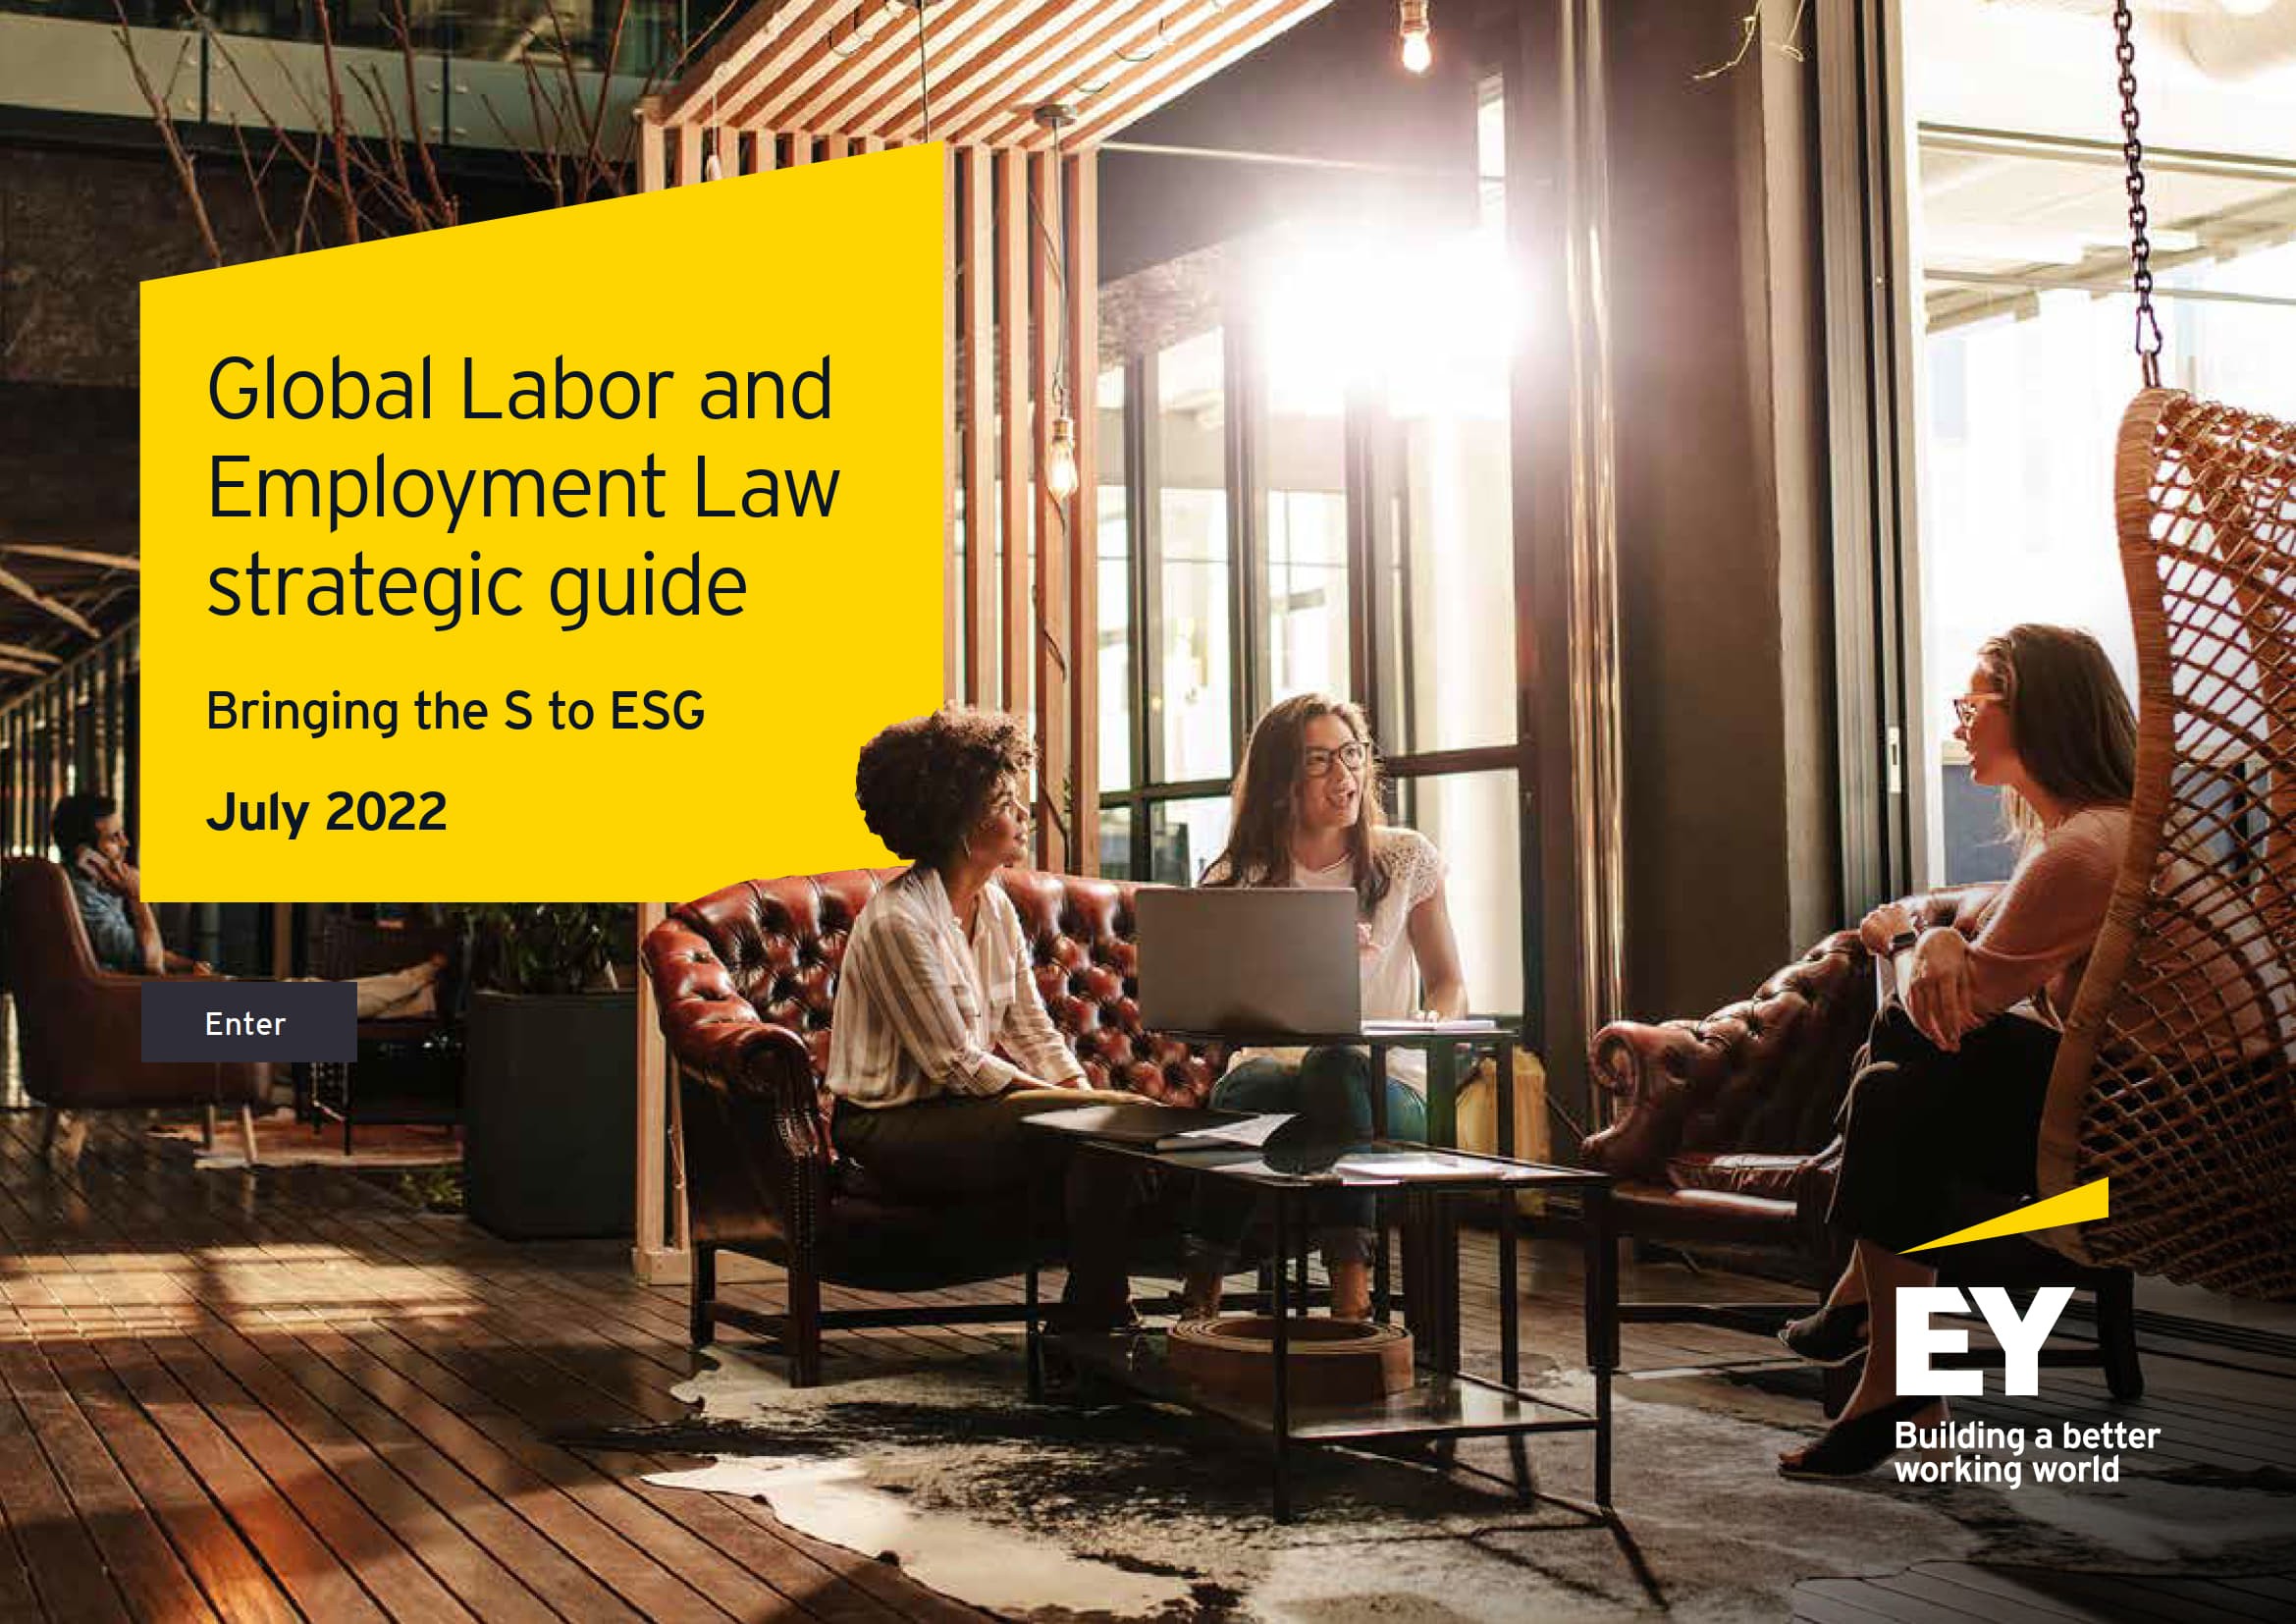 Global Labor and Employment Law strategic guide: Bringing the S to ESG, July 2022